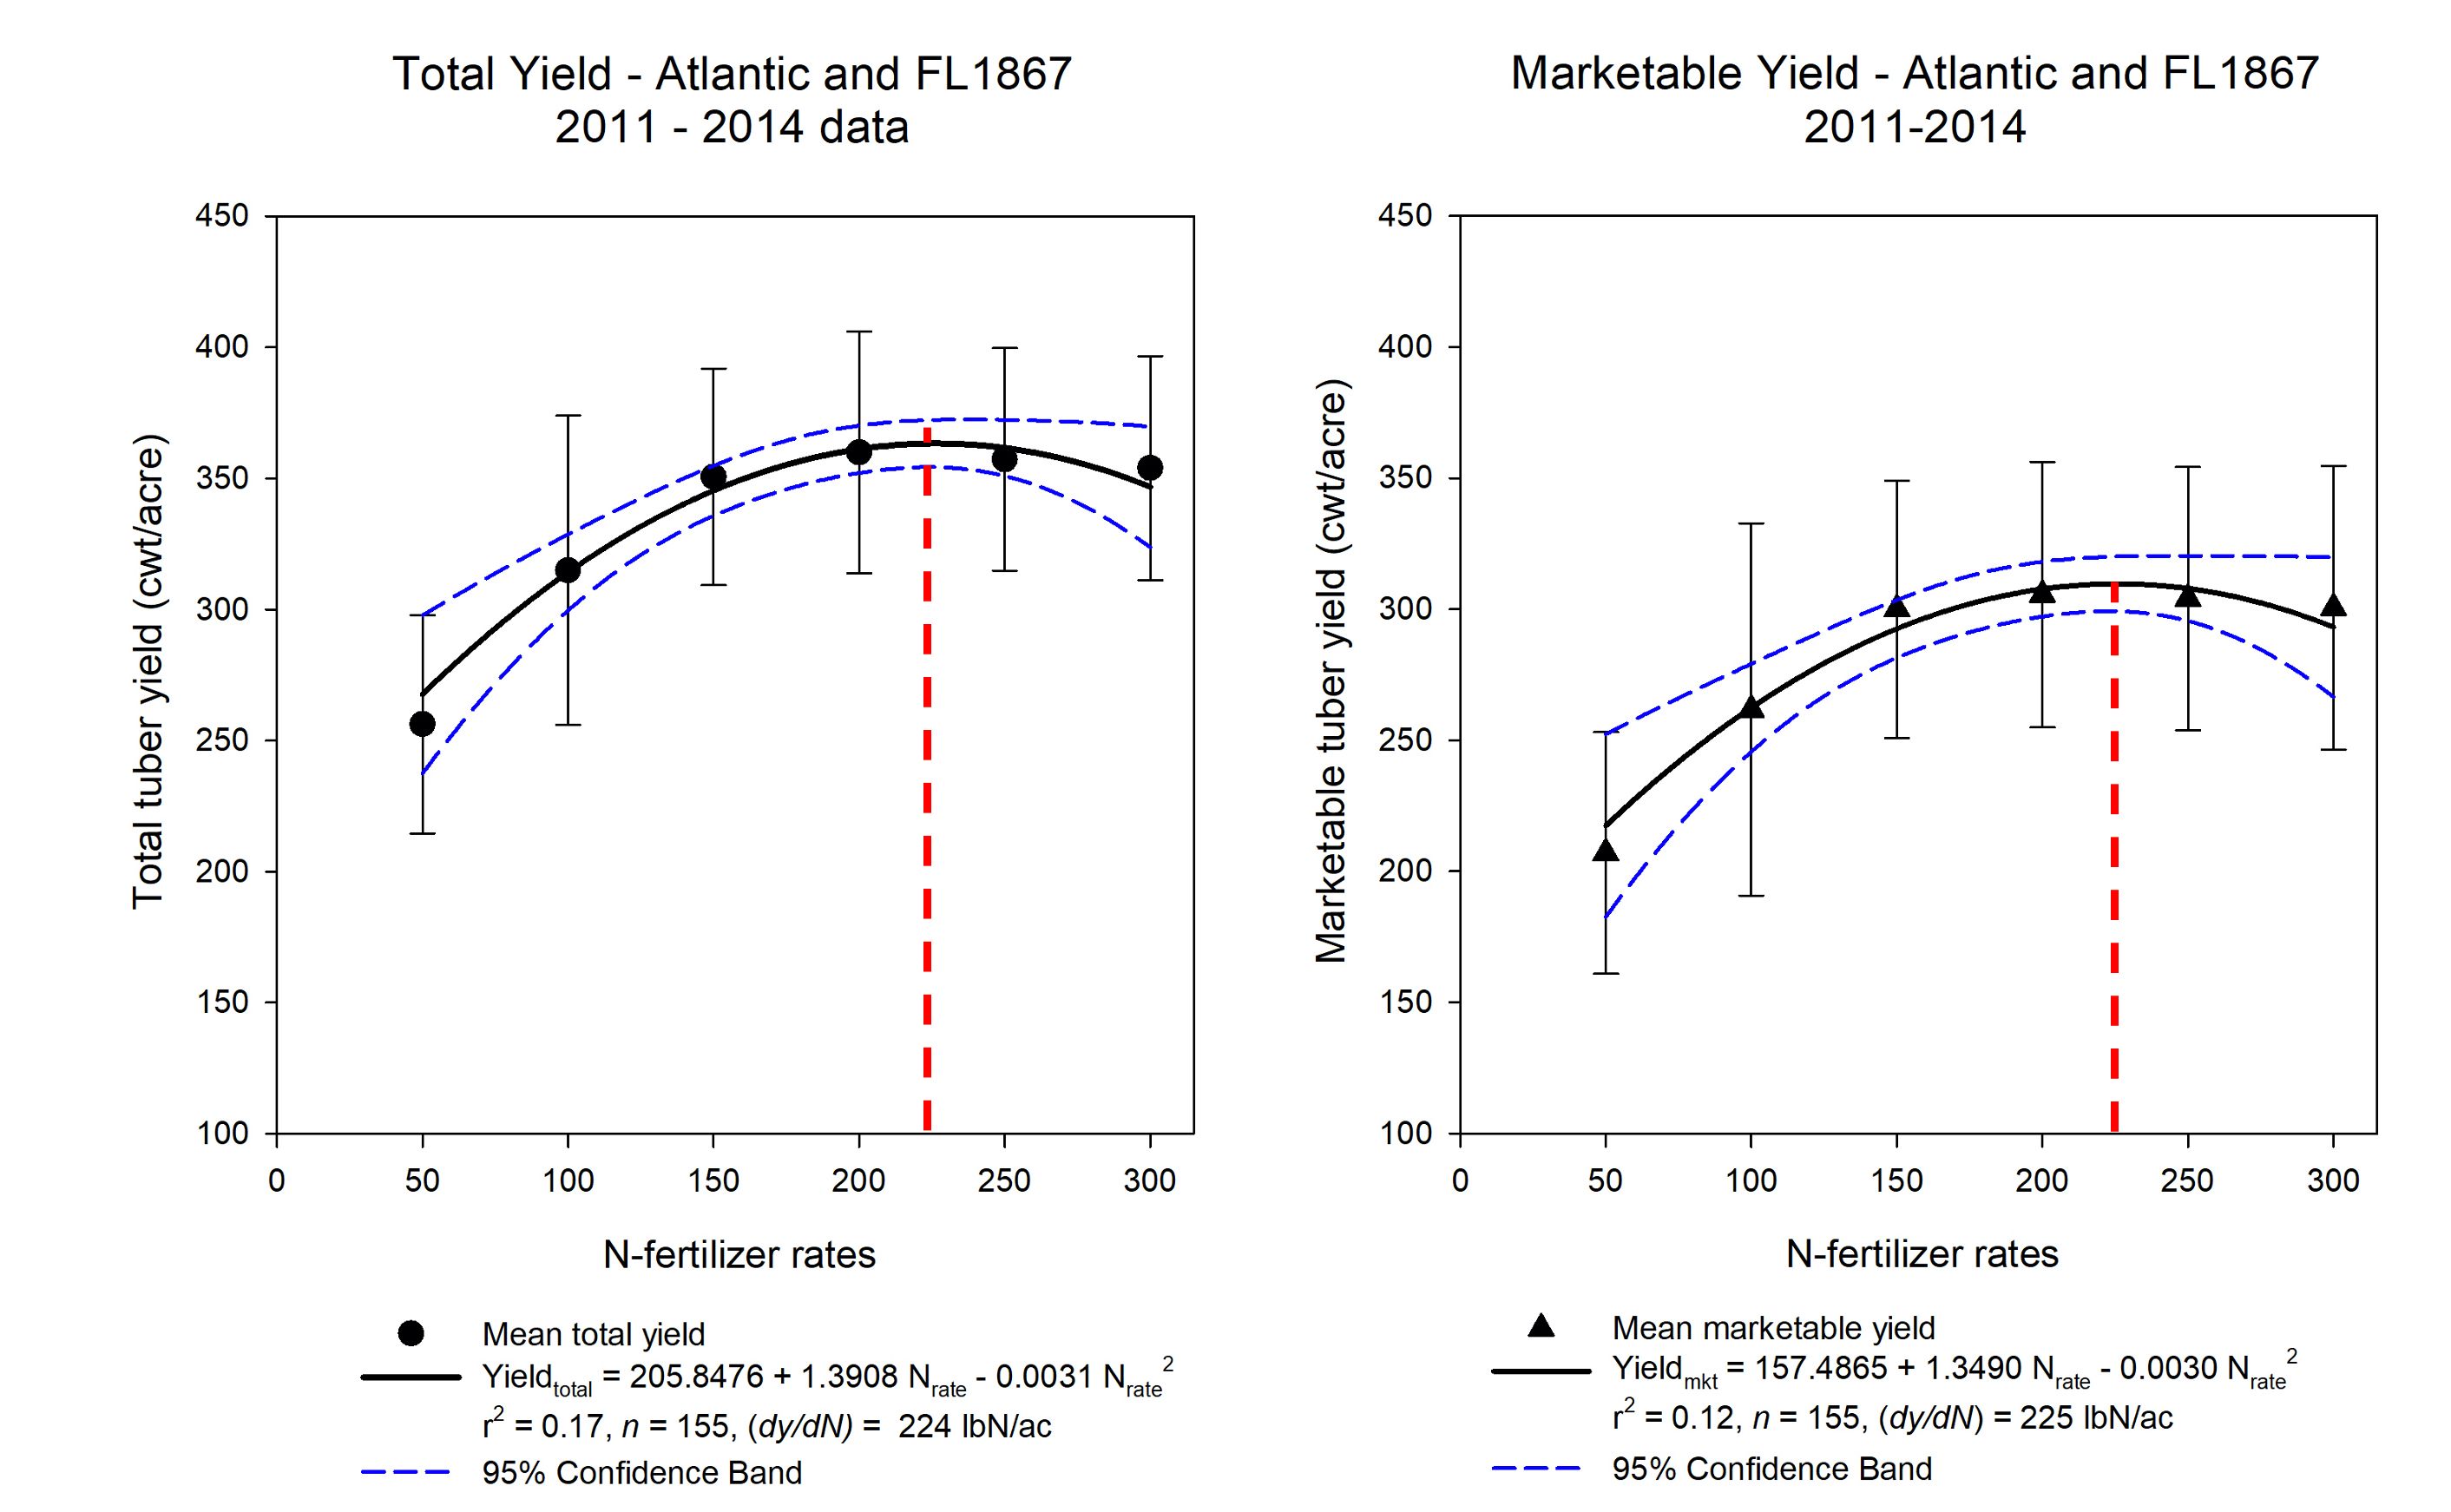 Total and marketable tuber yield response to N-fertilizer rates for cultivars Atlantic and FL1867 cultivated in six commercial fields of northeast Florida between 2011 and 2014. The red dotted line indicates maximum total and marketable yield estimated by setting the first derivative of the quadratic equation generated by the regression analysis equal to zero. Error bars indicate standard deviation. The total number of observations = 155. 